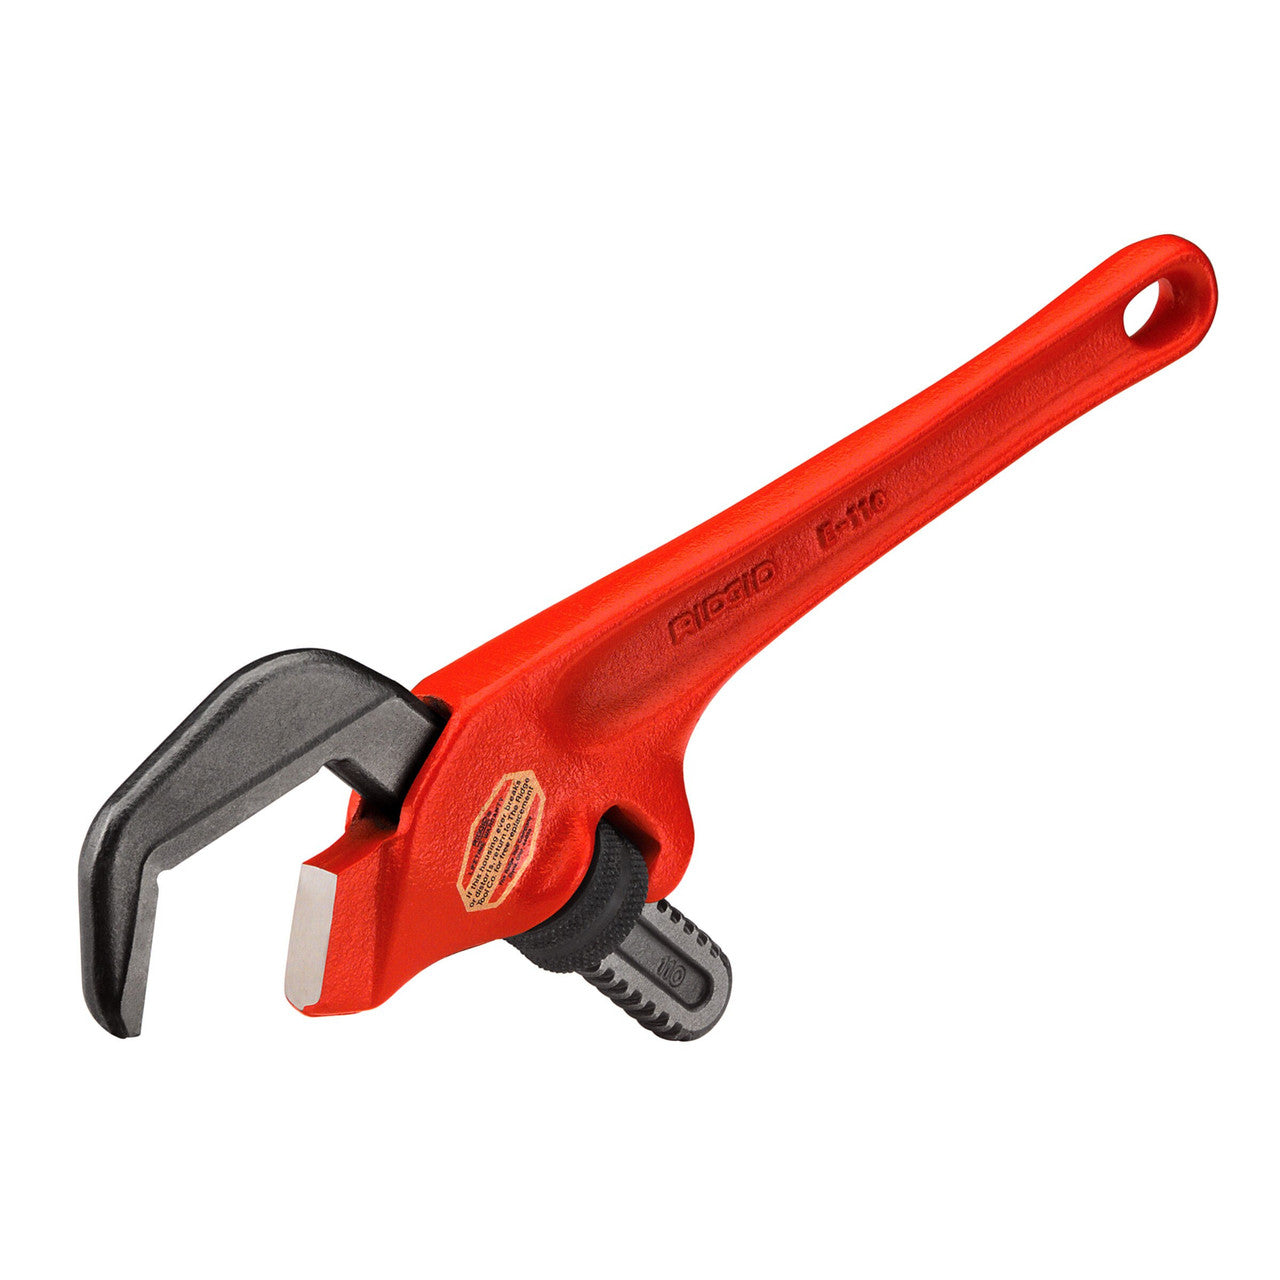 Ridgid E110 Offset Hex Pipe Wrench 9. 1/2 Inch / 240mm